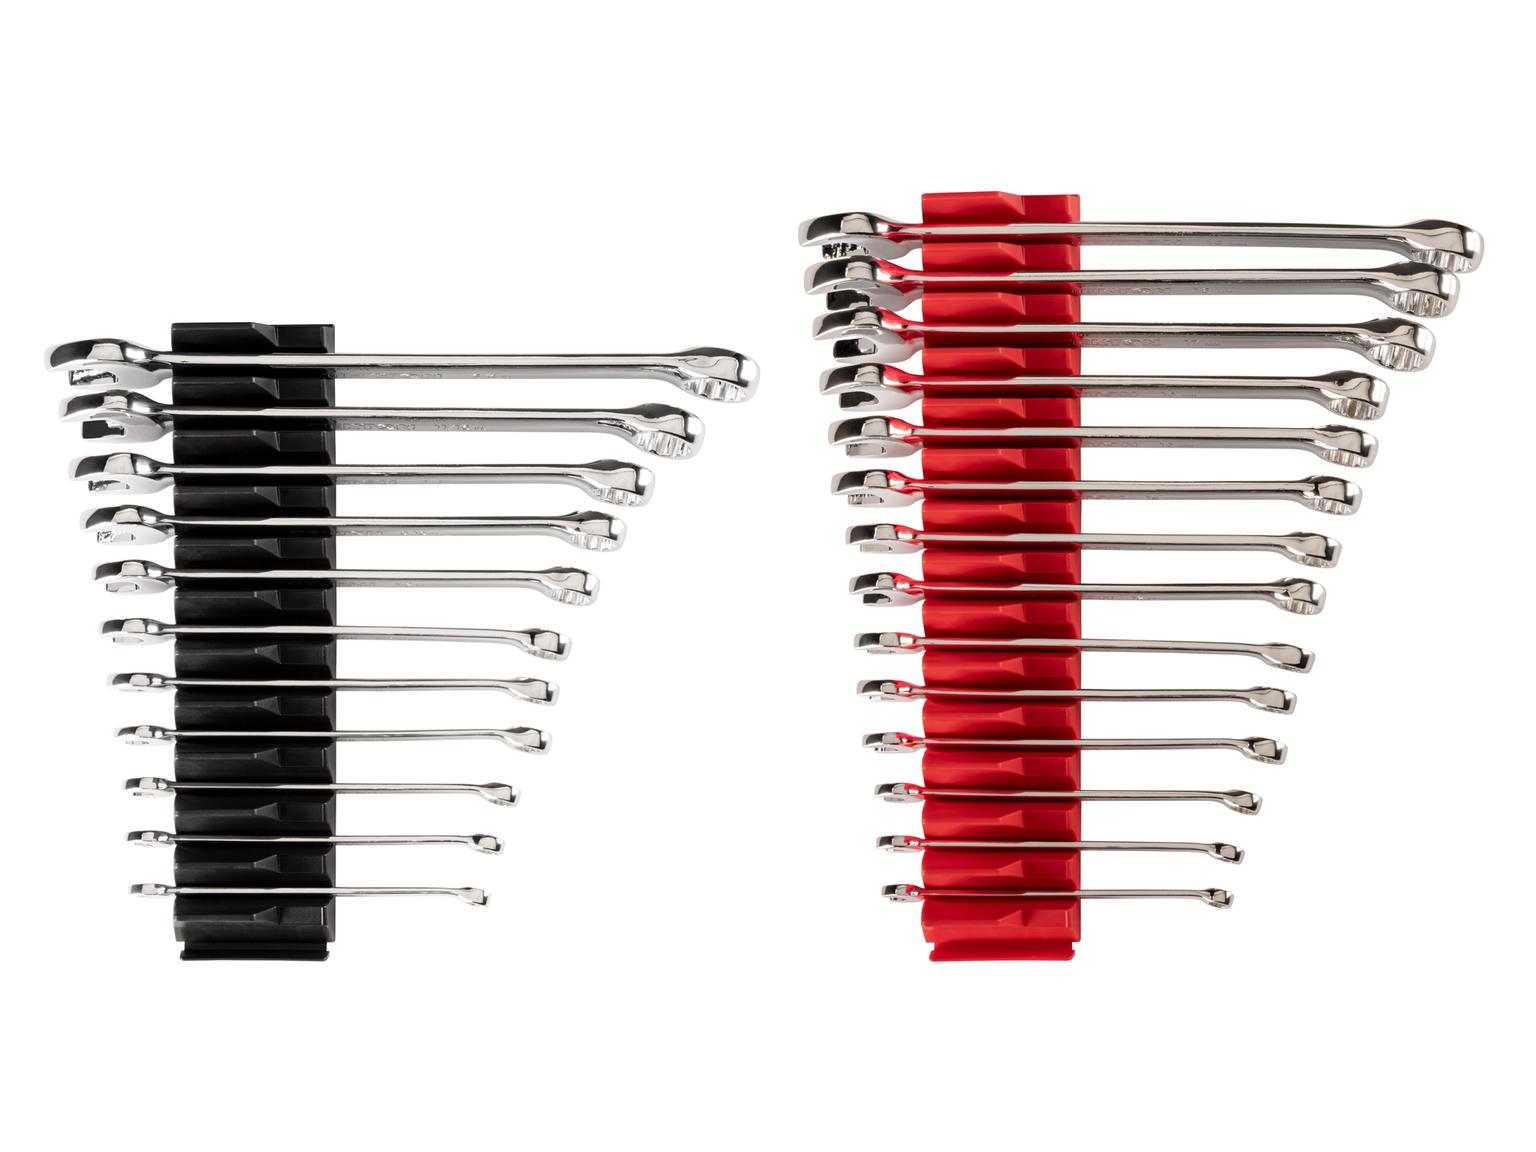 TEKTON WCB95301-T Combination Wrench Set with Modular Slotted Organizer, 25-Piece (1/4 - 3/4 in., 6 - 19 mm)